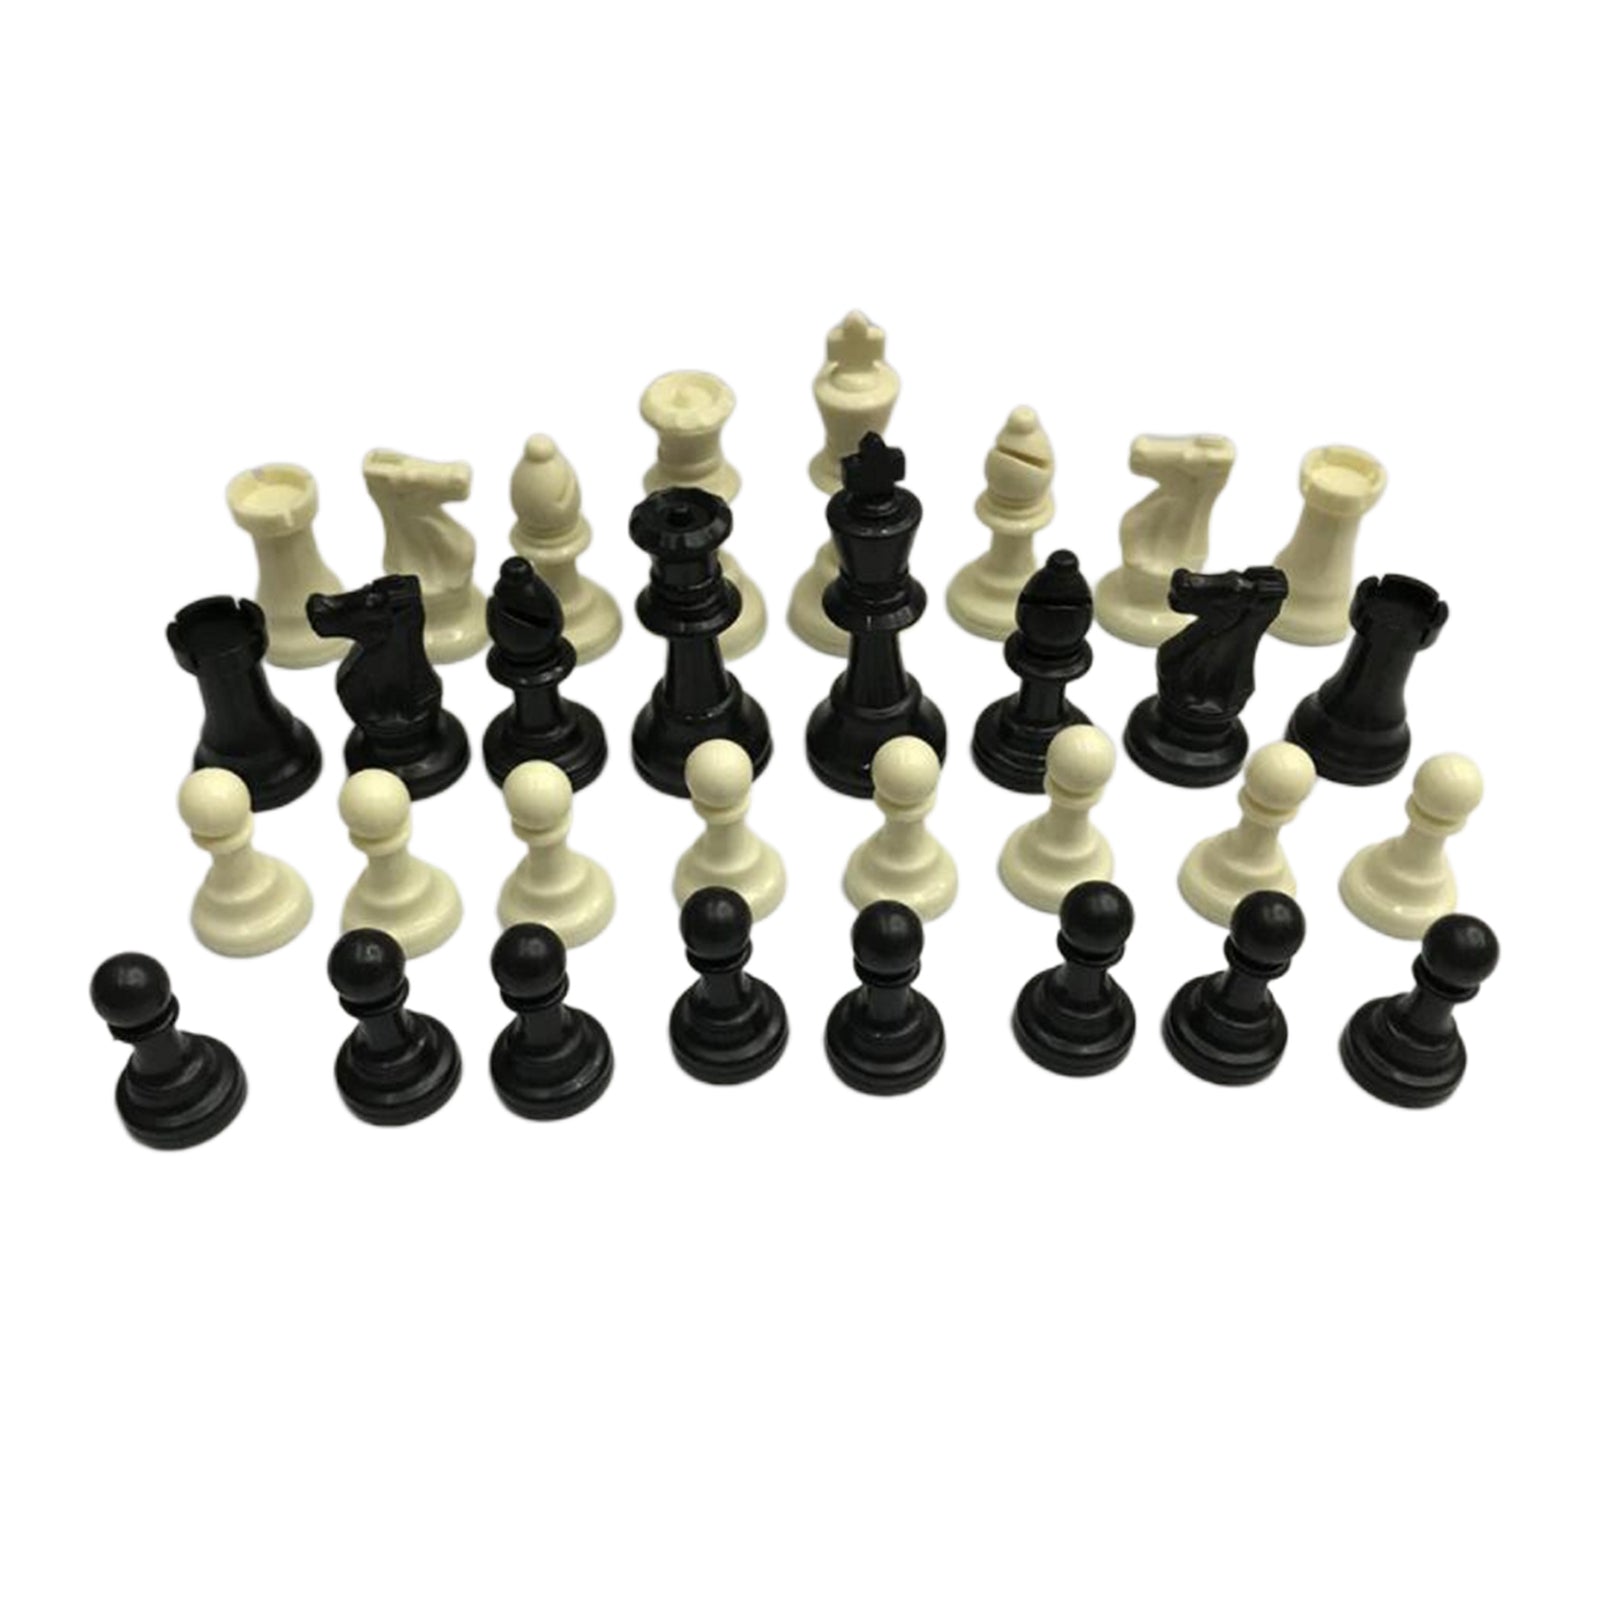 Standard Chess Pieces Set Board Game 64mm King for Adult Children No Board